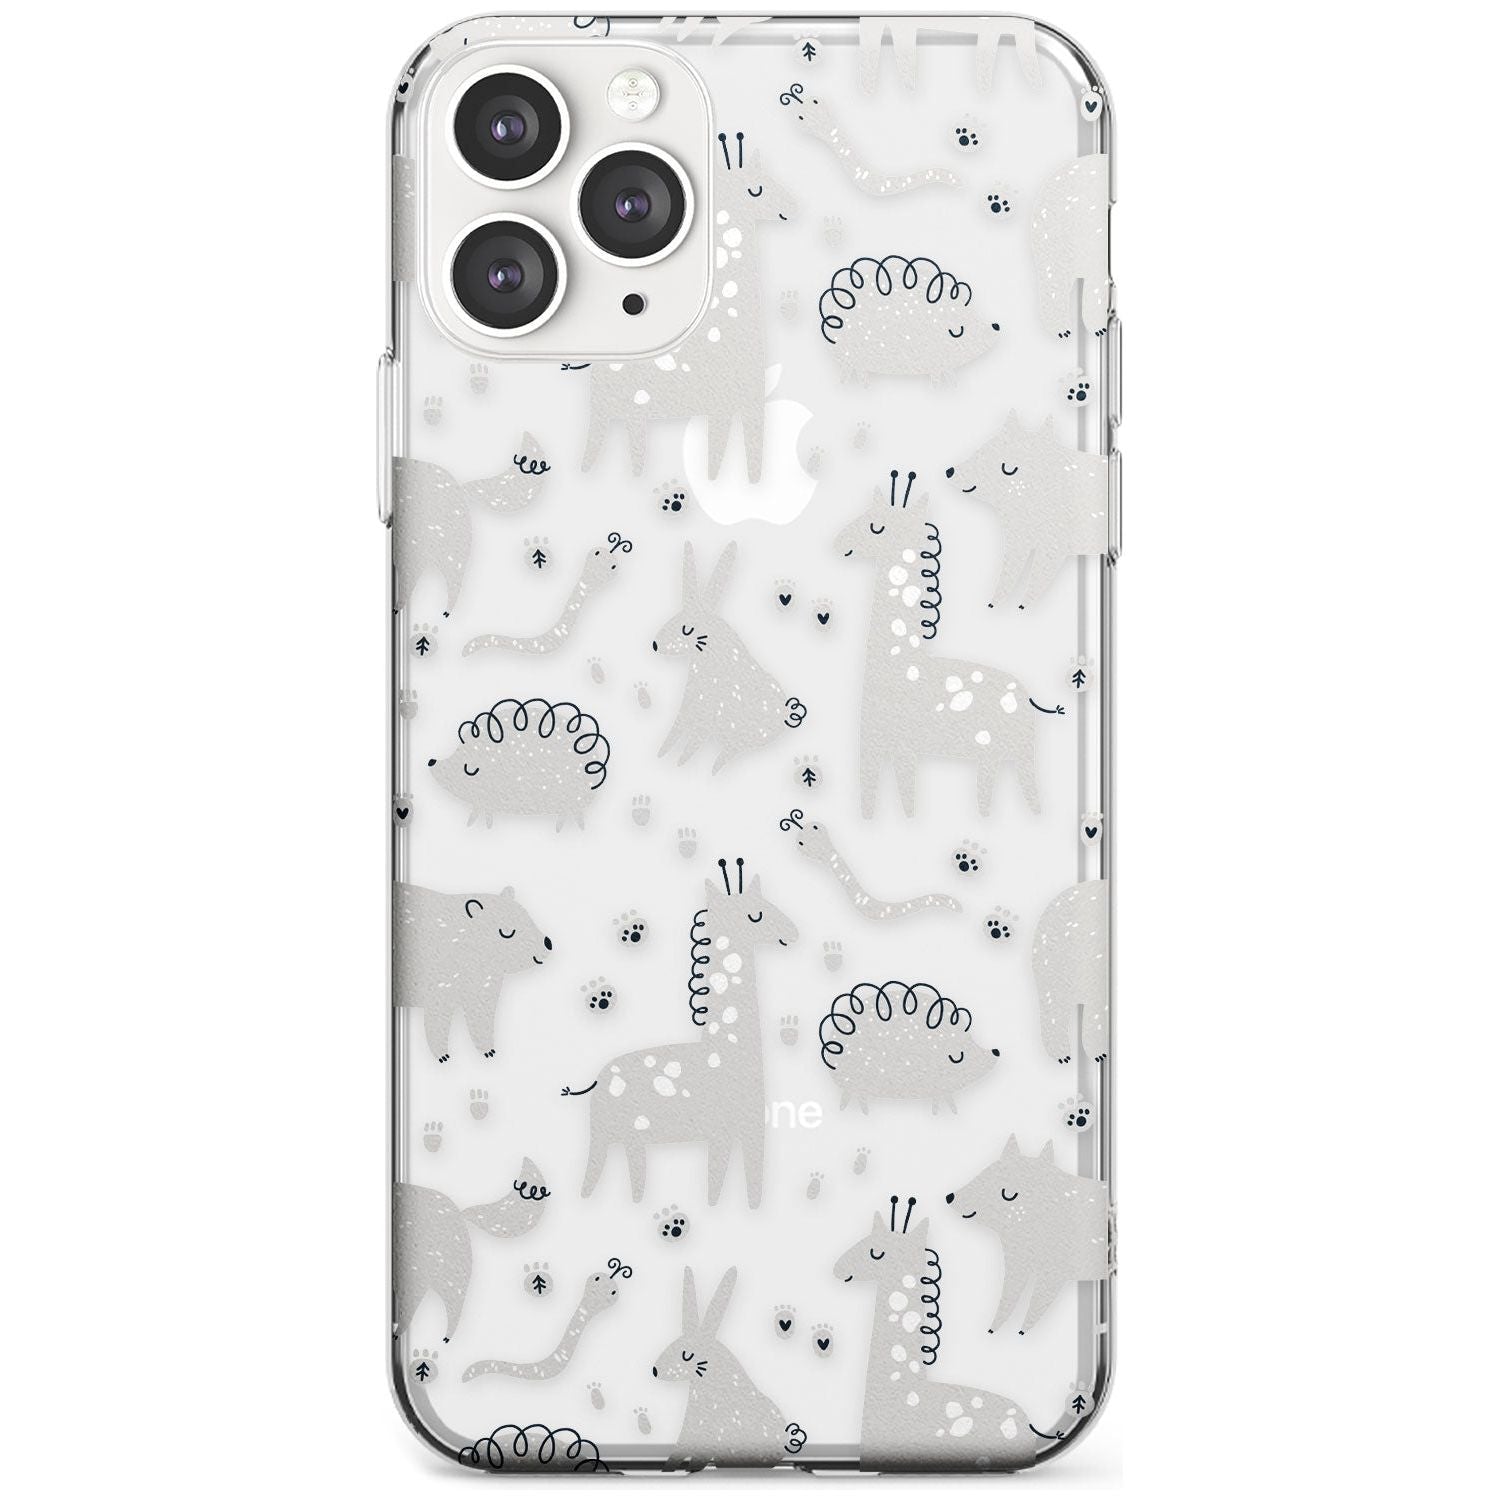 Adorable Mixed Animals Pattern (Clear) Slim TPU Phone Case for iPhone 11 Pro Max